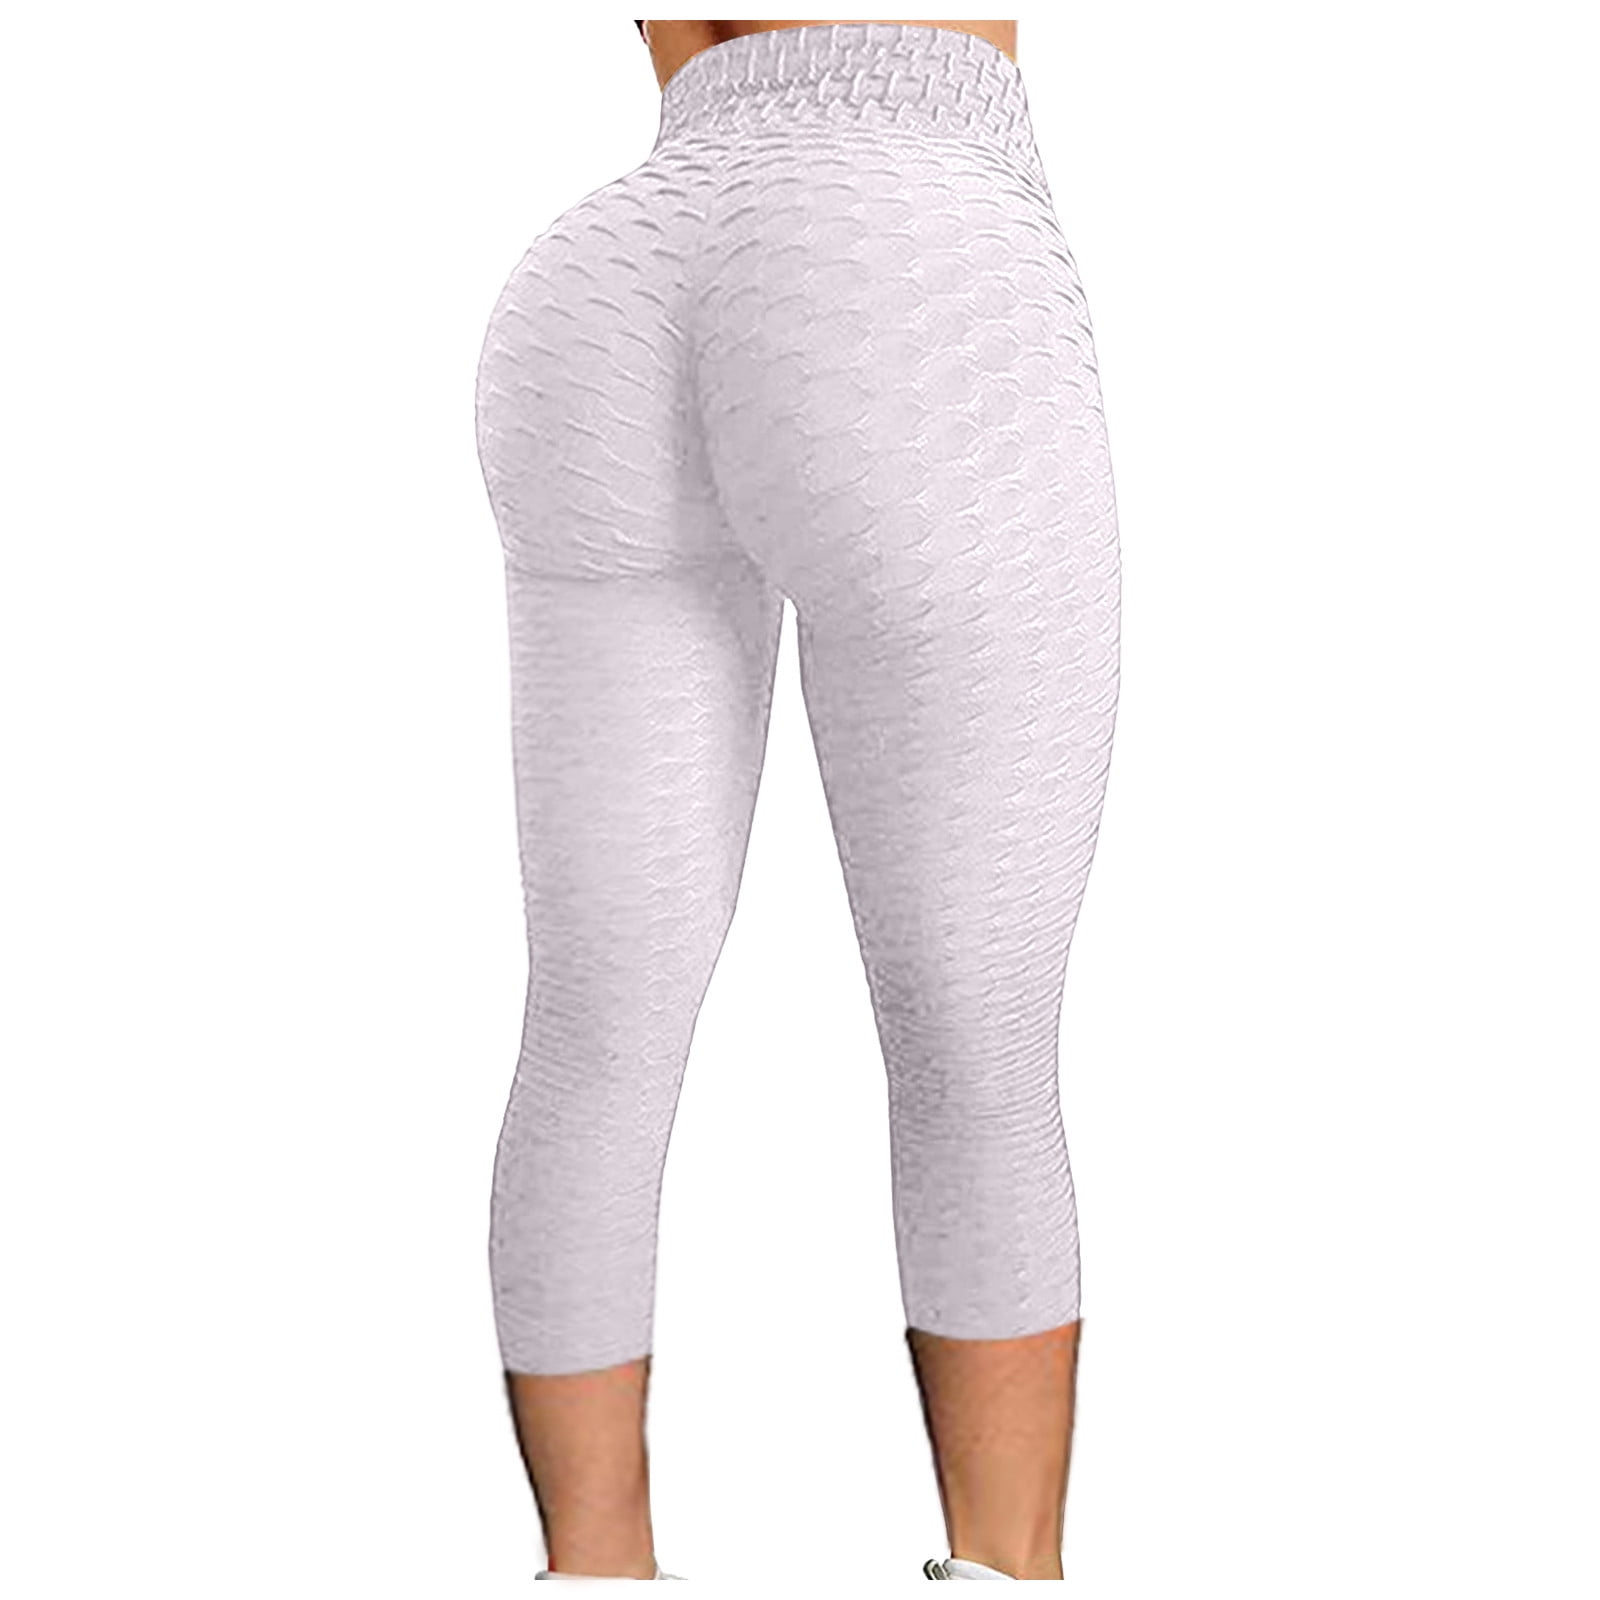 high lifting exercise fitness women's bubble waist yoga running pants yoga  pants yoga pants lot small wedgie yoga pants extra long yoga pants